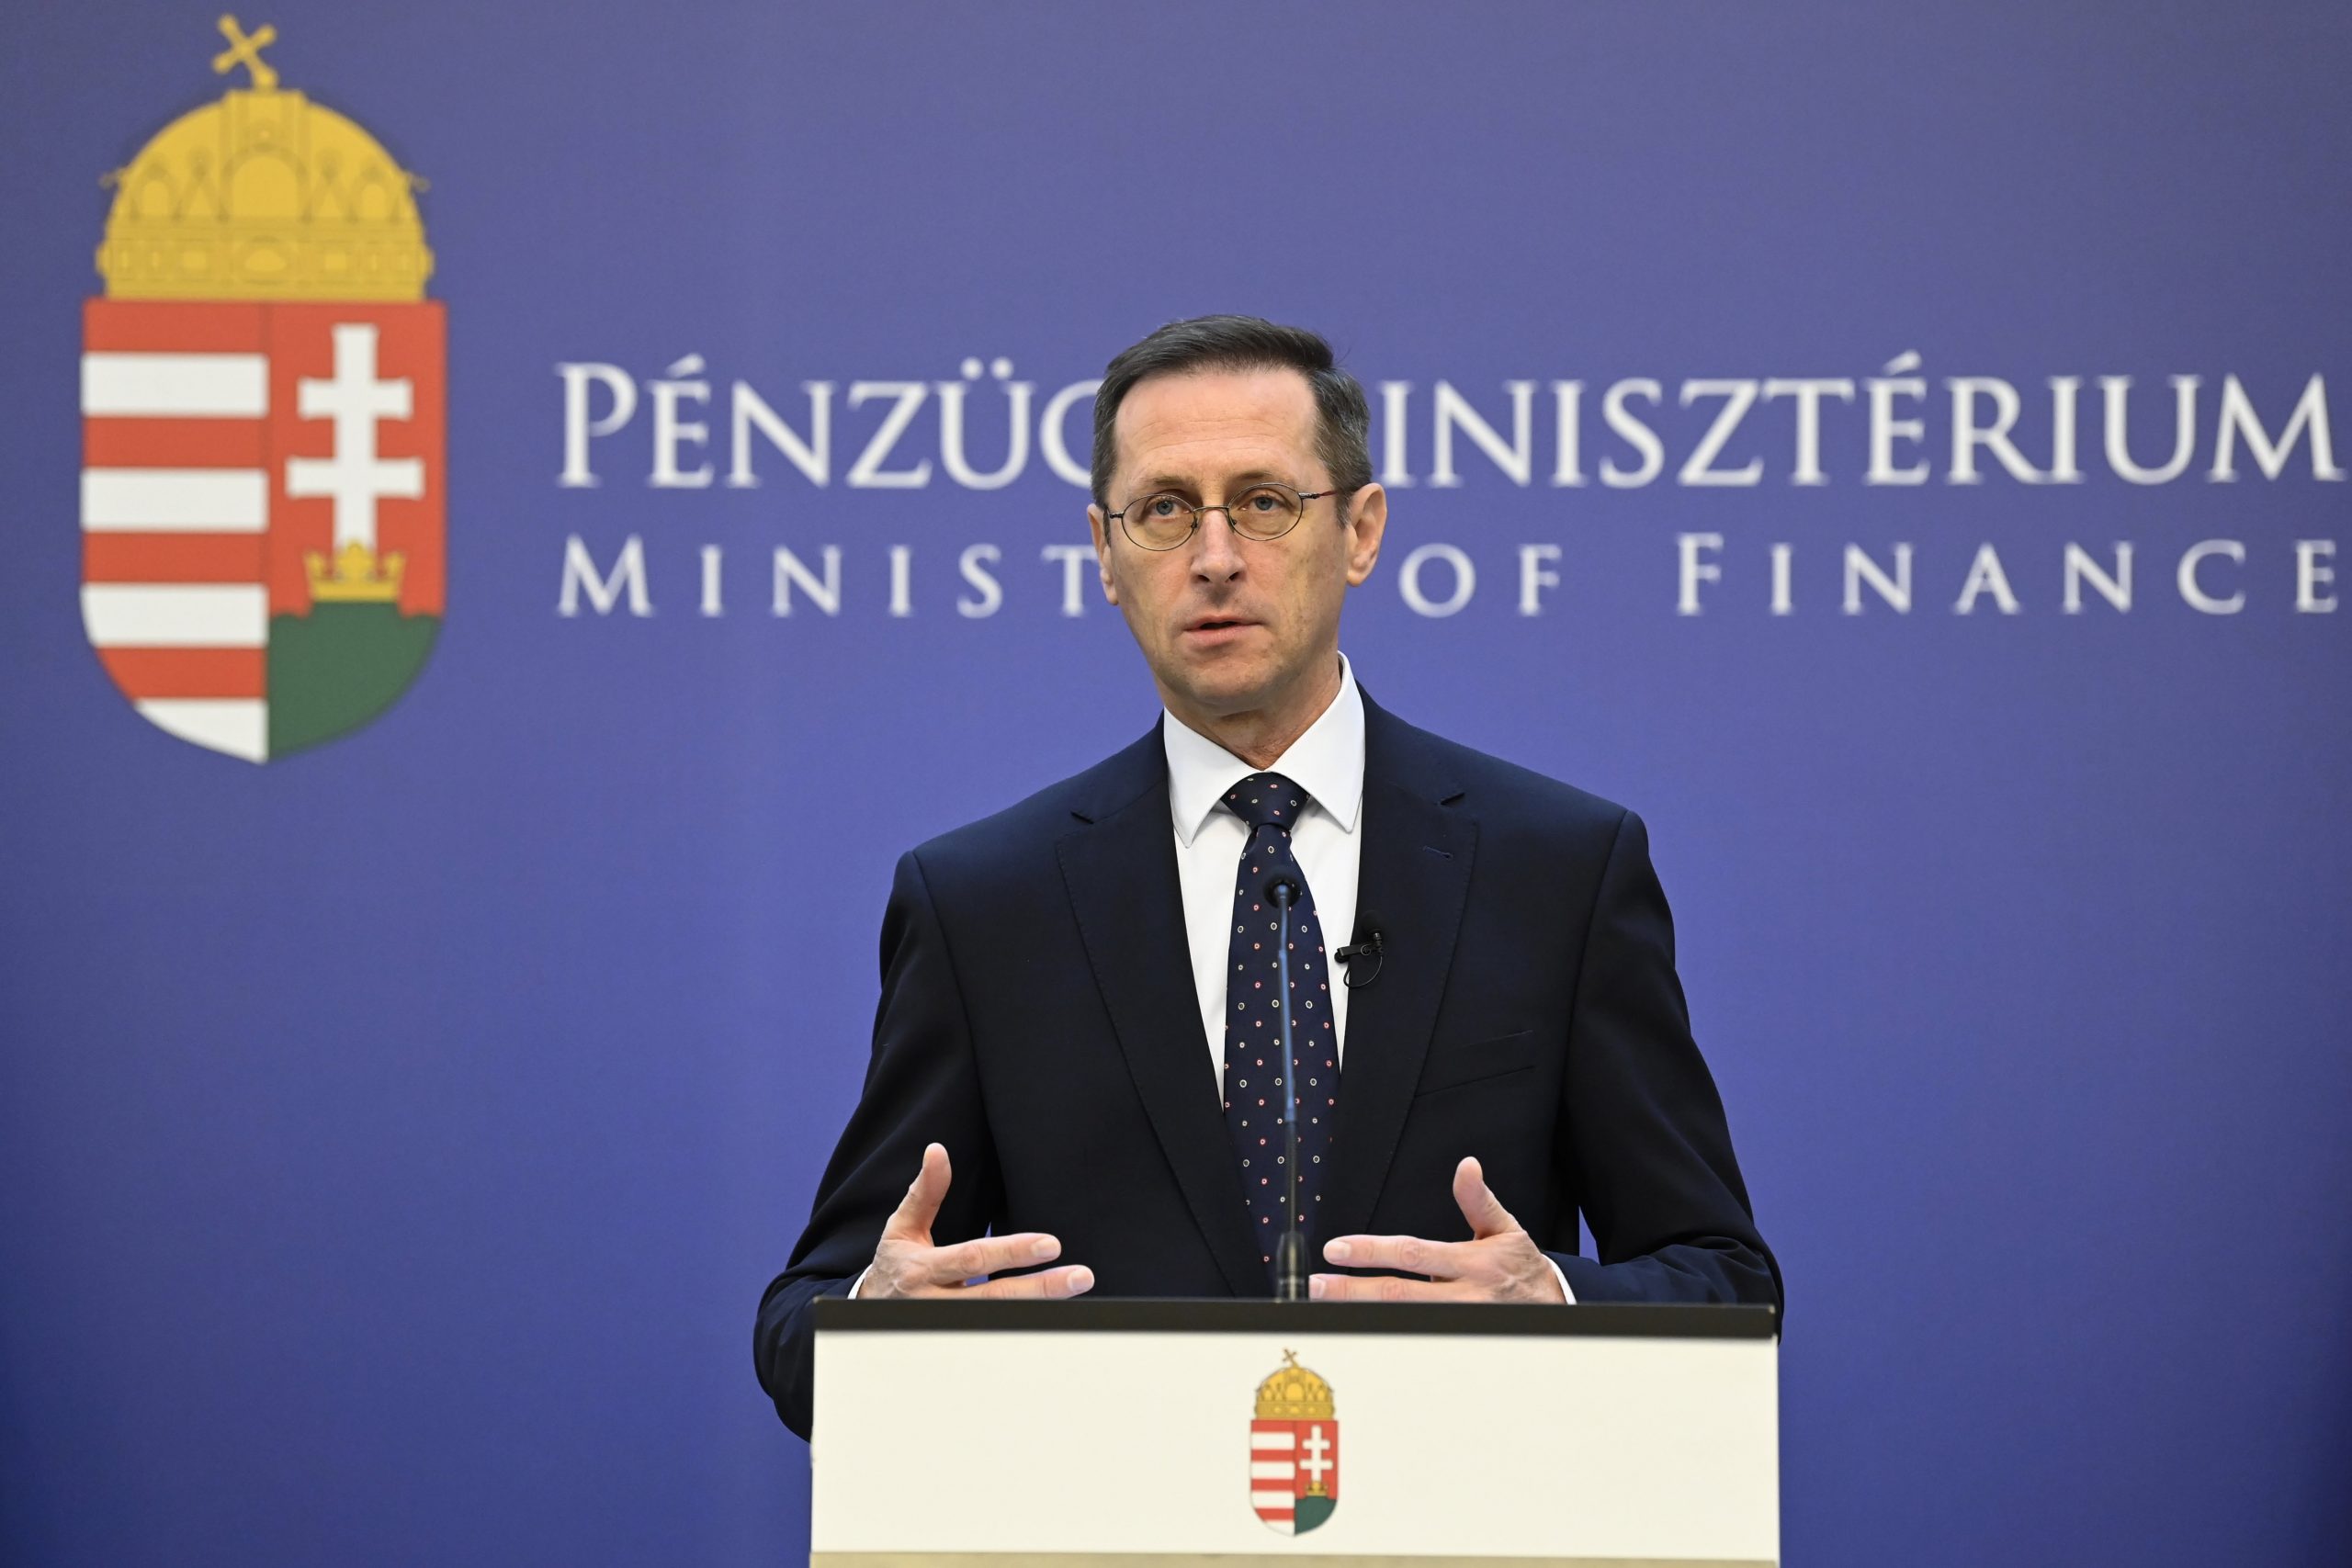 Hungary Budget Deficit Grows by HUF 1,000 Billion in a Month